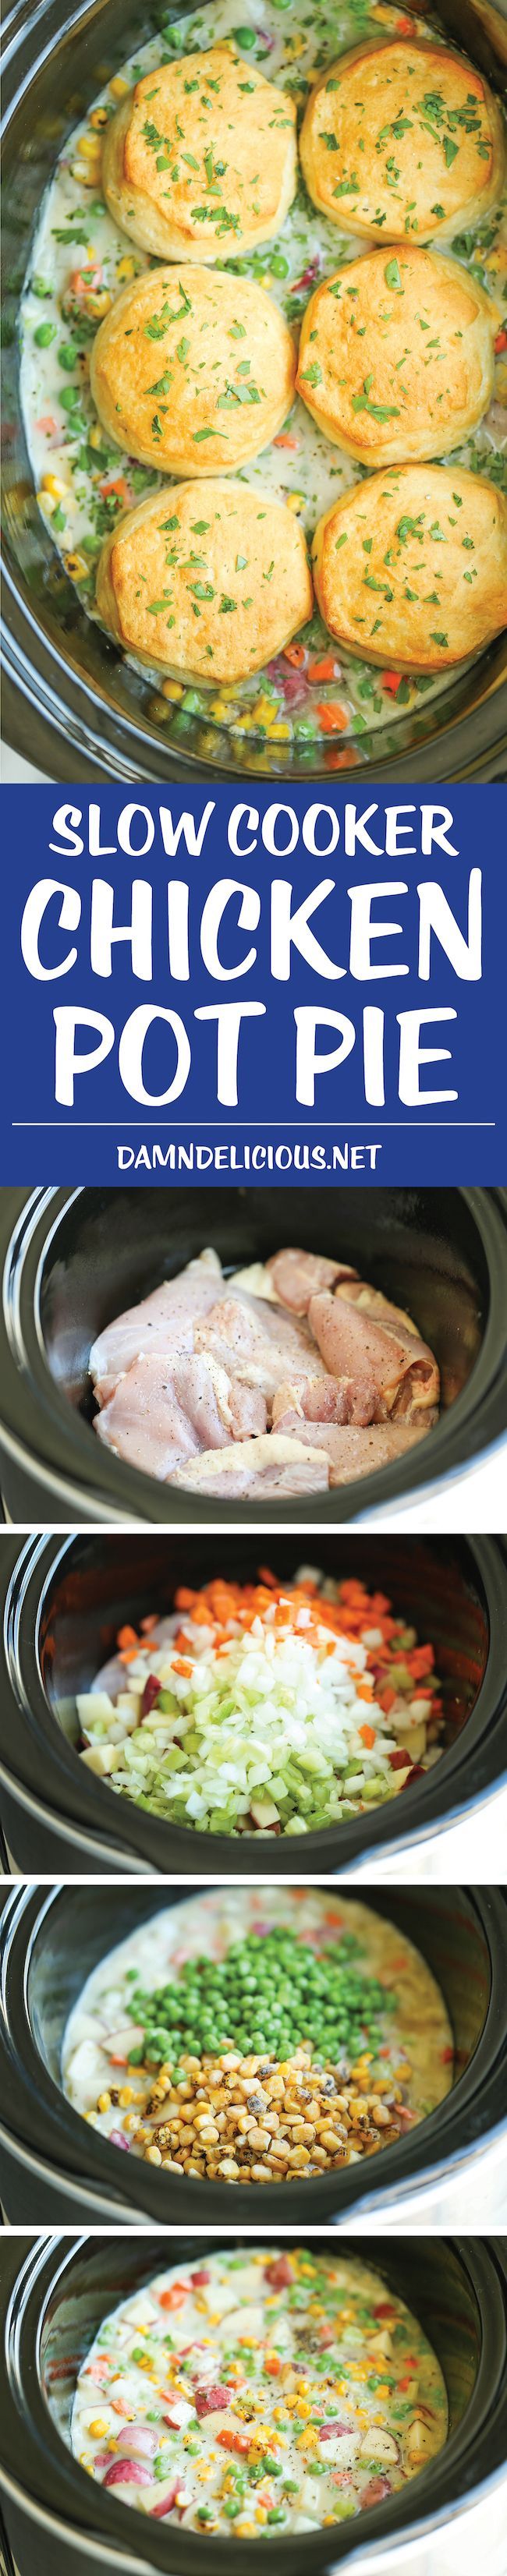 Slow Cooker Chicken Pot Pie – The easiest pot pie recipe ever made right in the crockpot from scratch – no condensed cream of